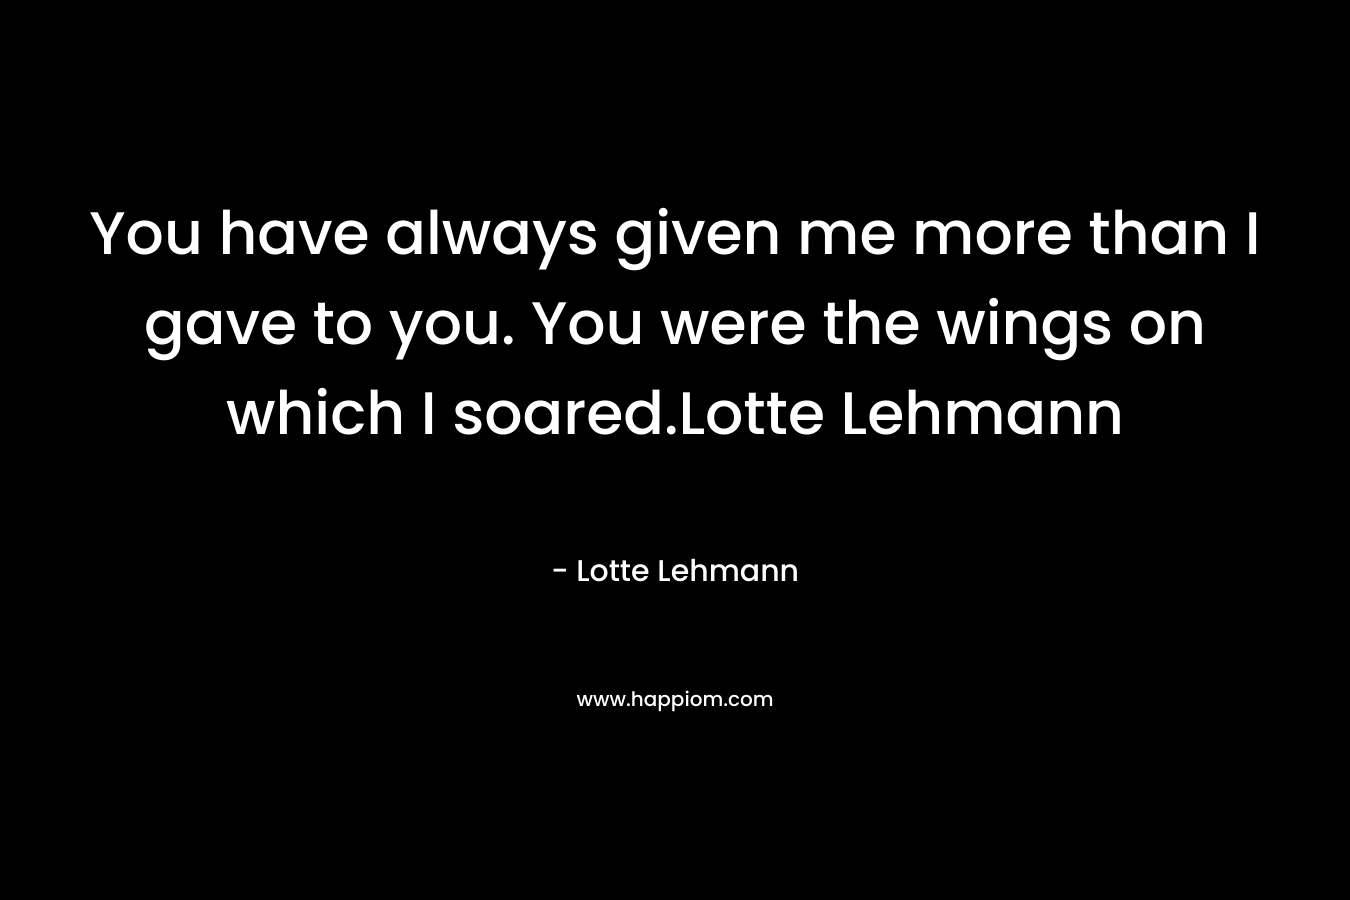 You have always given me more than I gave to you. You were the wings on which I soared.Lotte Lehmann – Lotte Lehmann